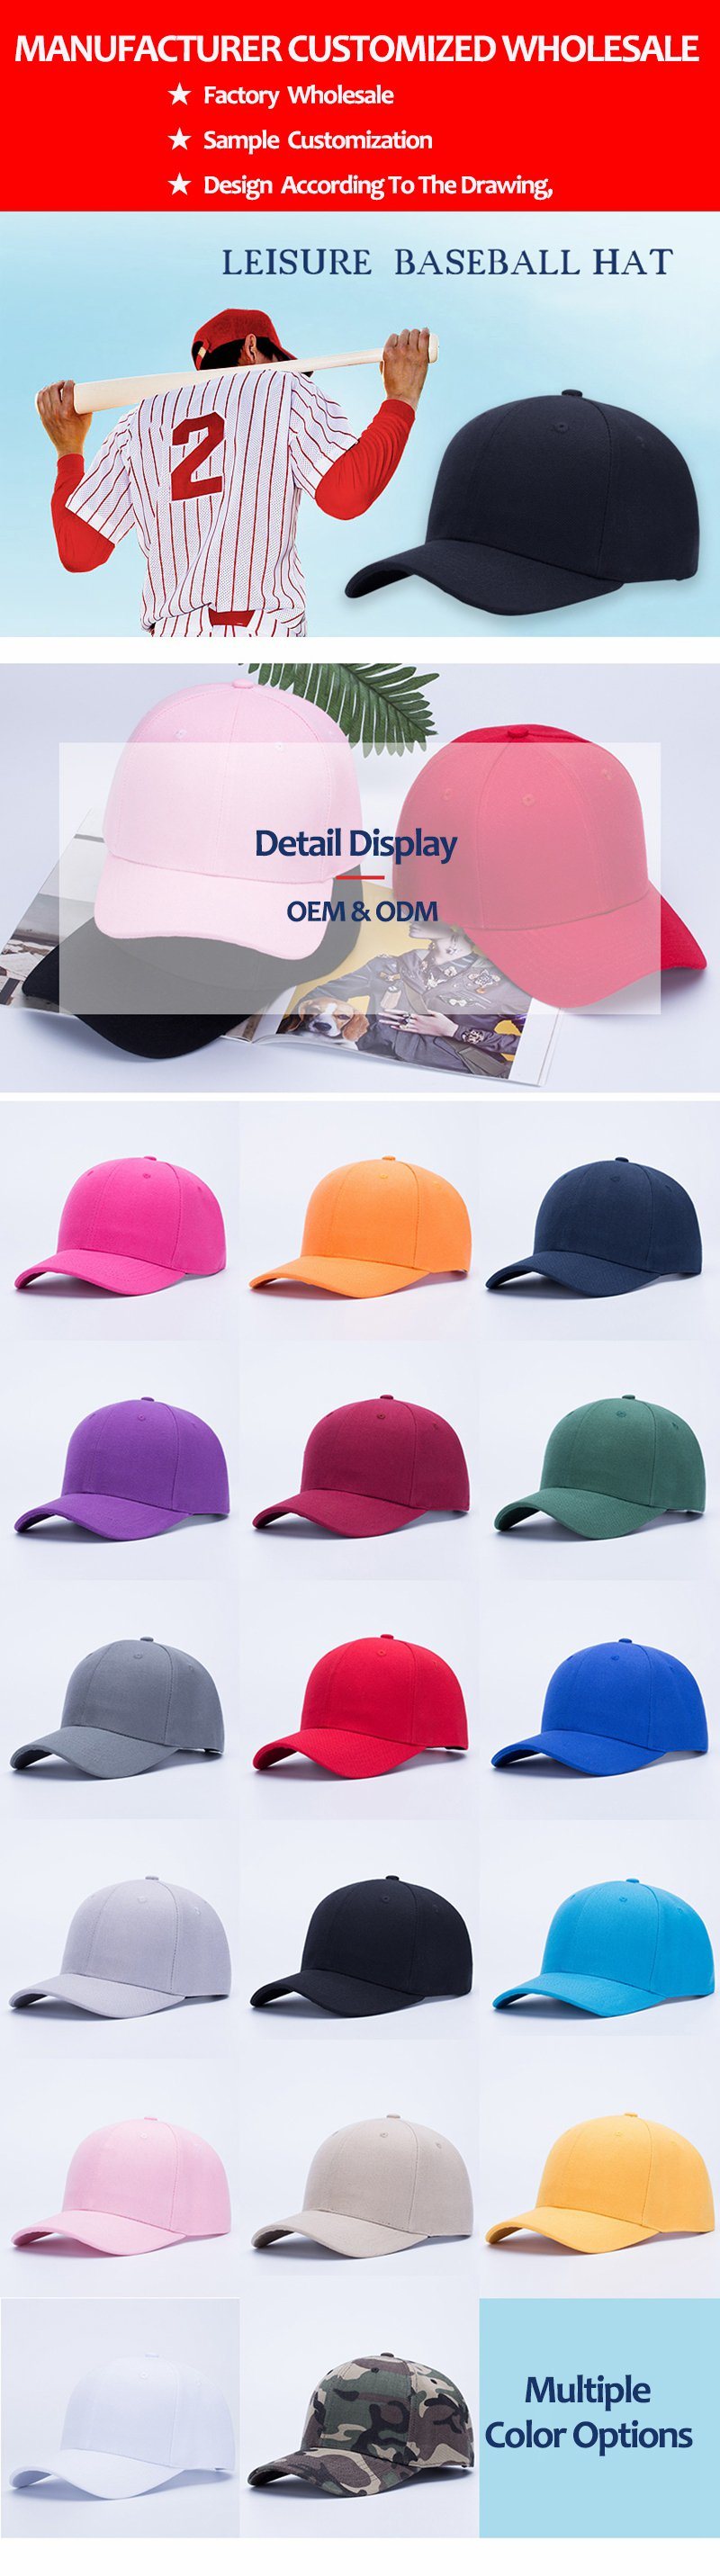 DIY Washed Cotton Baseball Cap Hat Worn Baseball Cap Fitted Hat